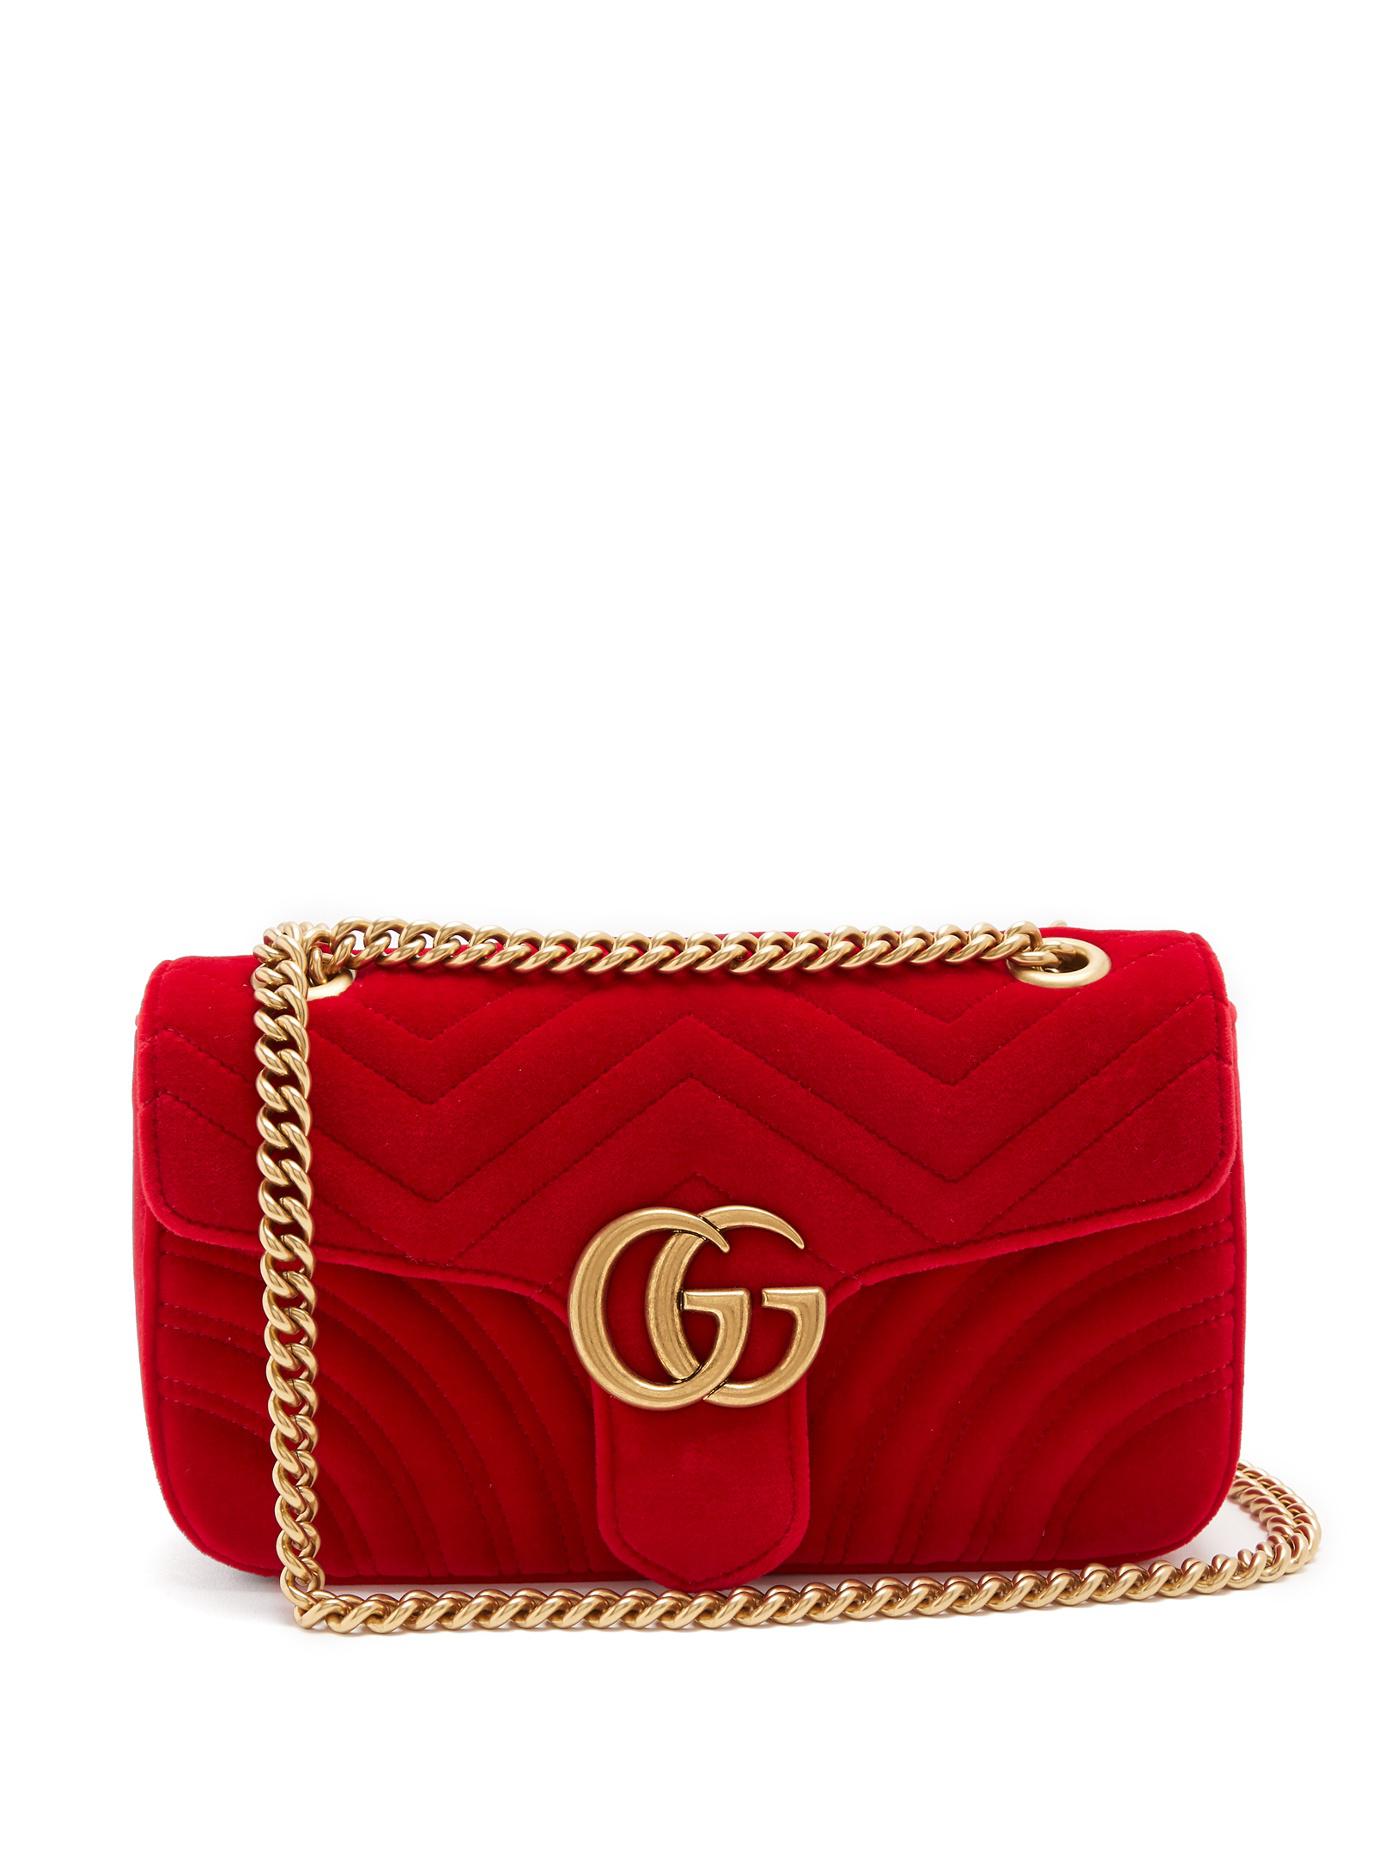 Gucci Gg Marmont Small Quilted-velvet Cross-body Bag in Red - Lyst